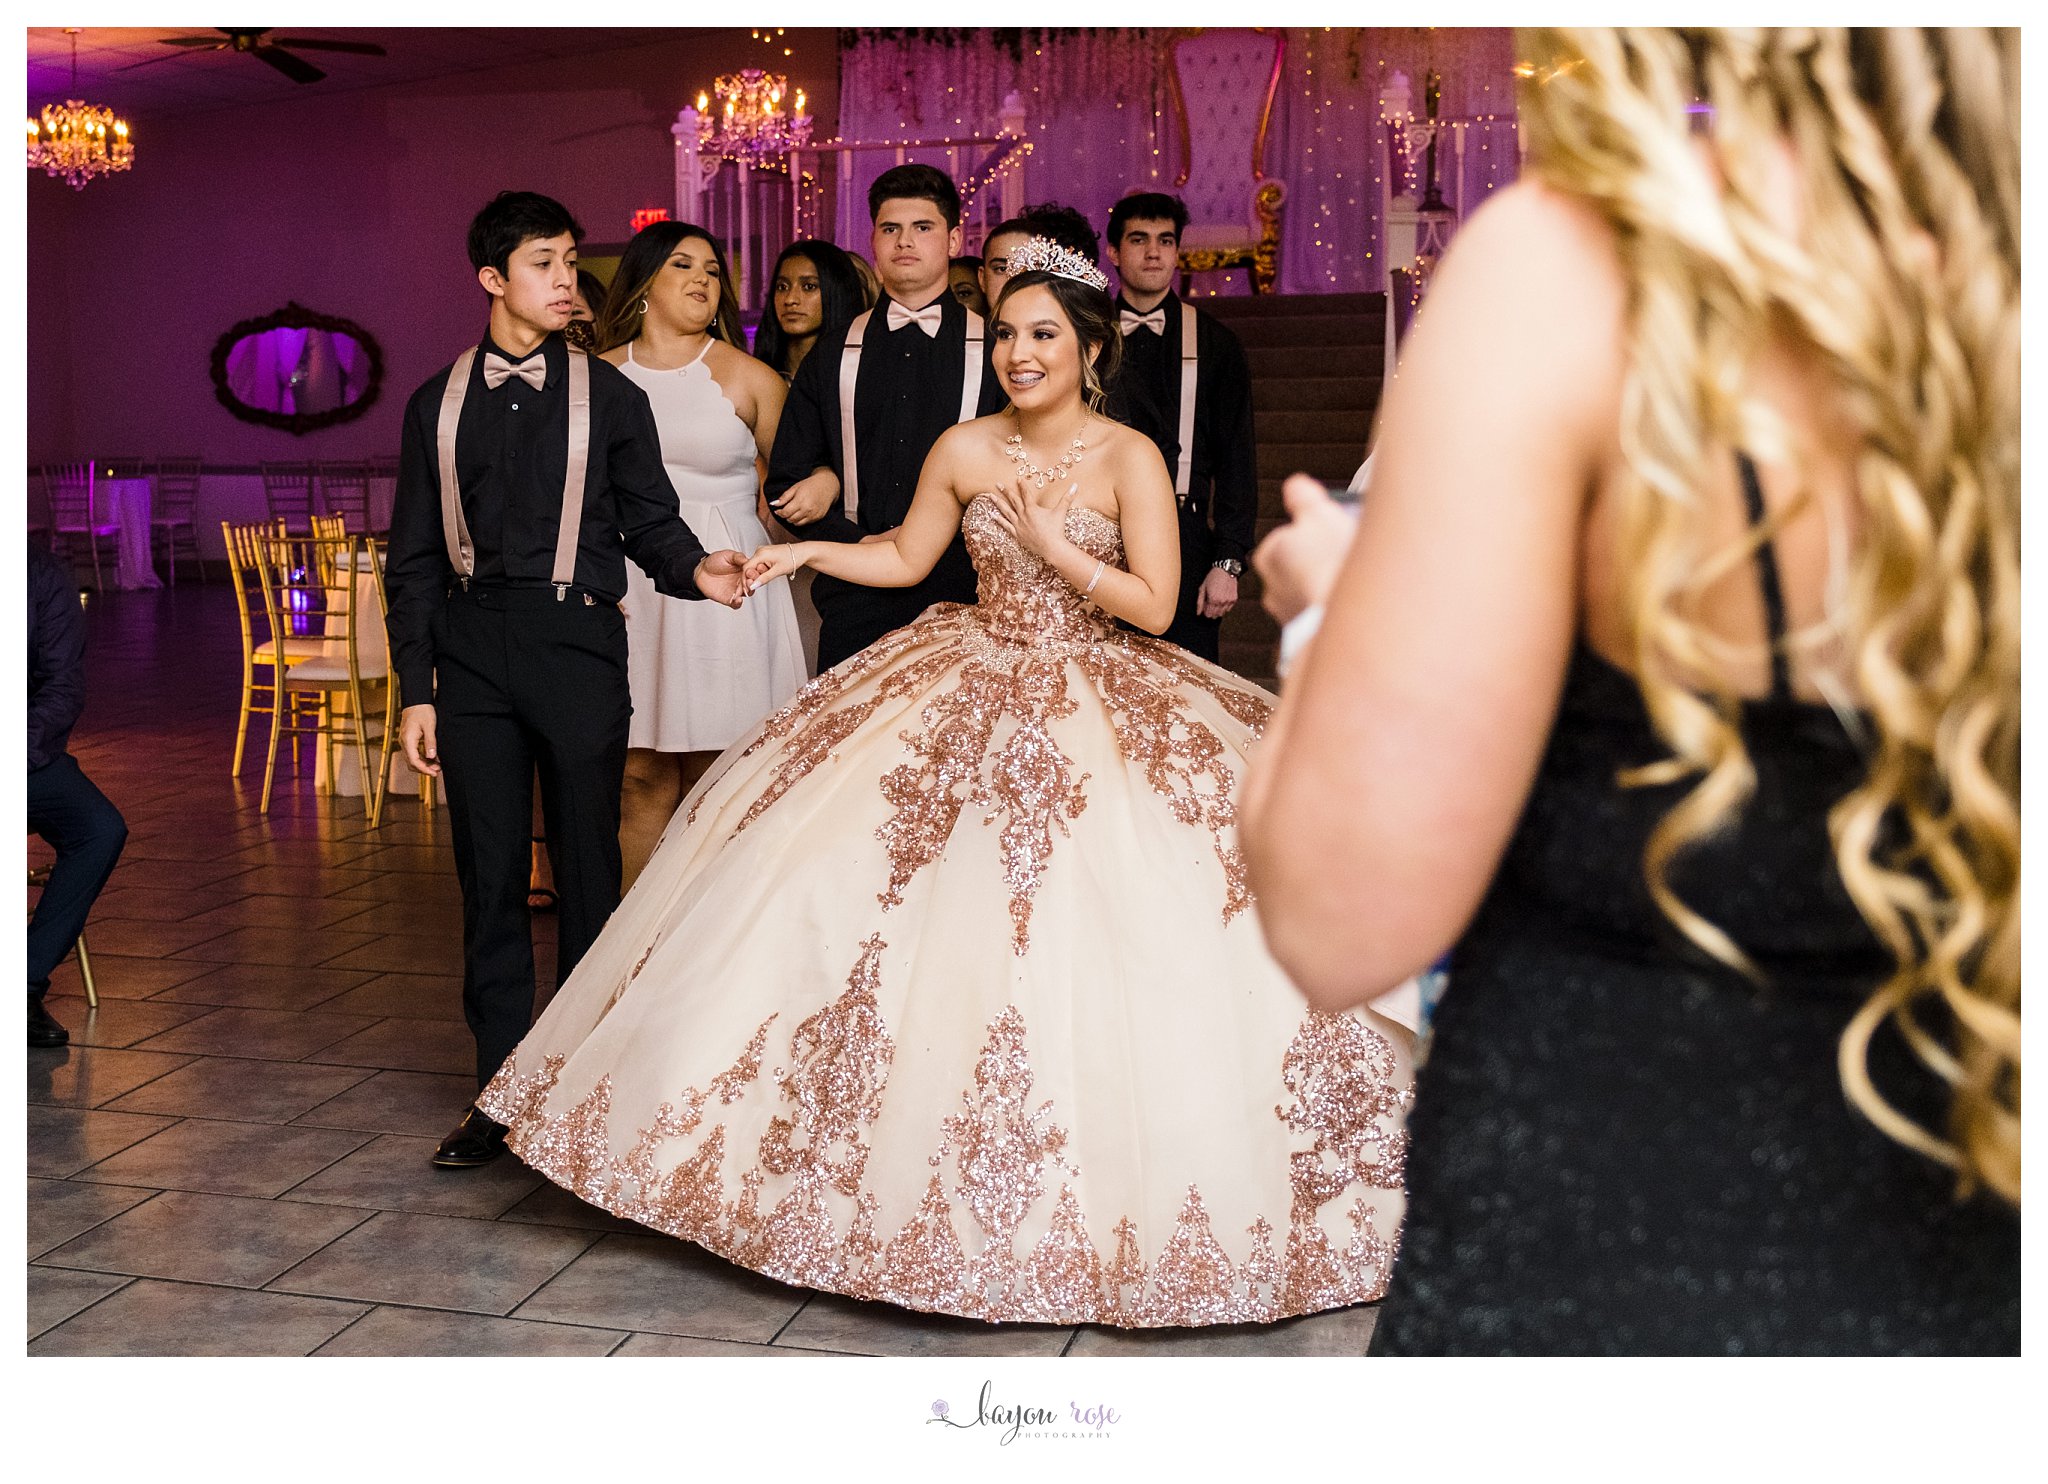 quinceanera enters with her court